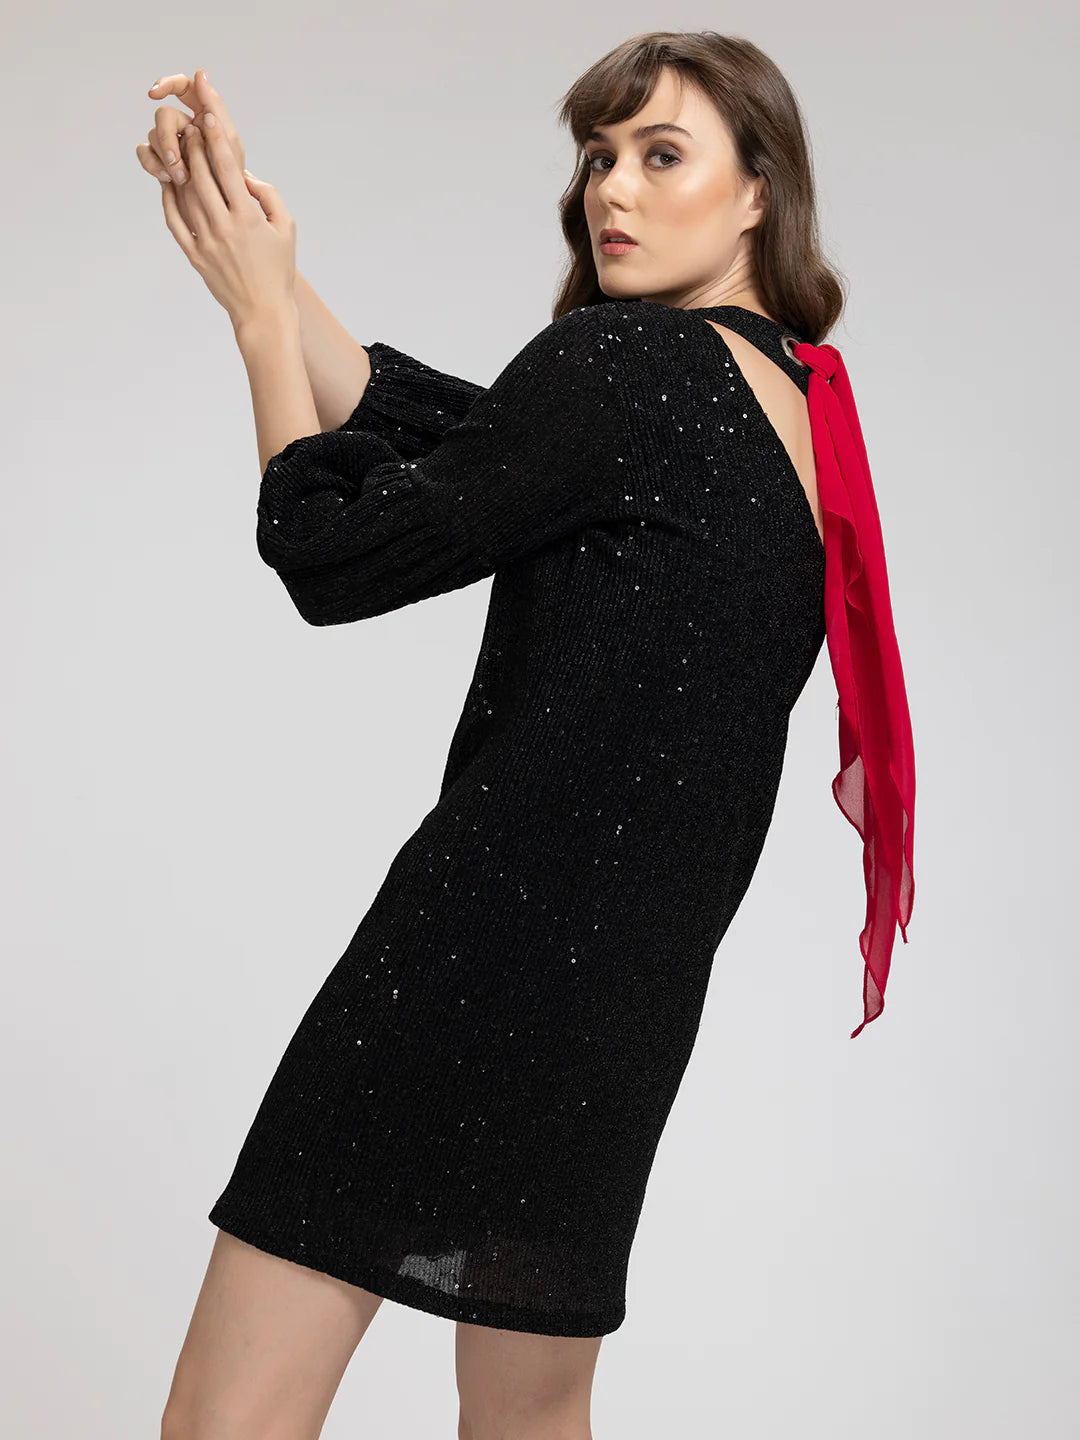 Paisian Sequined Dress | Parisian Nights Sequined Dress